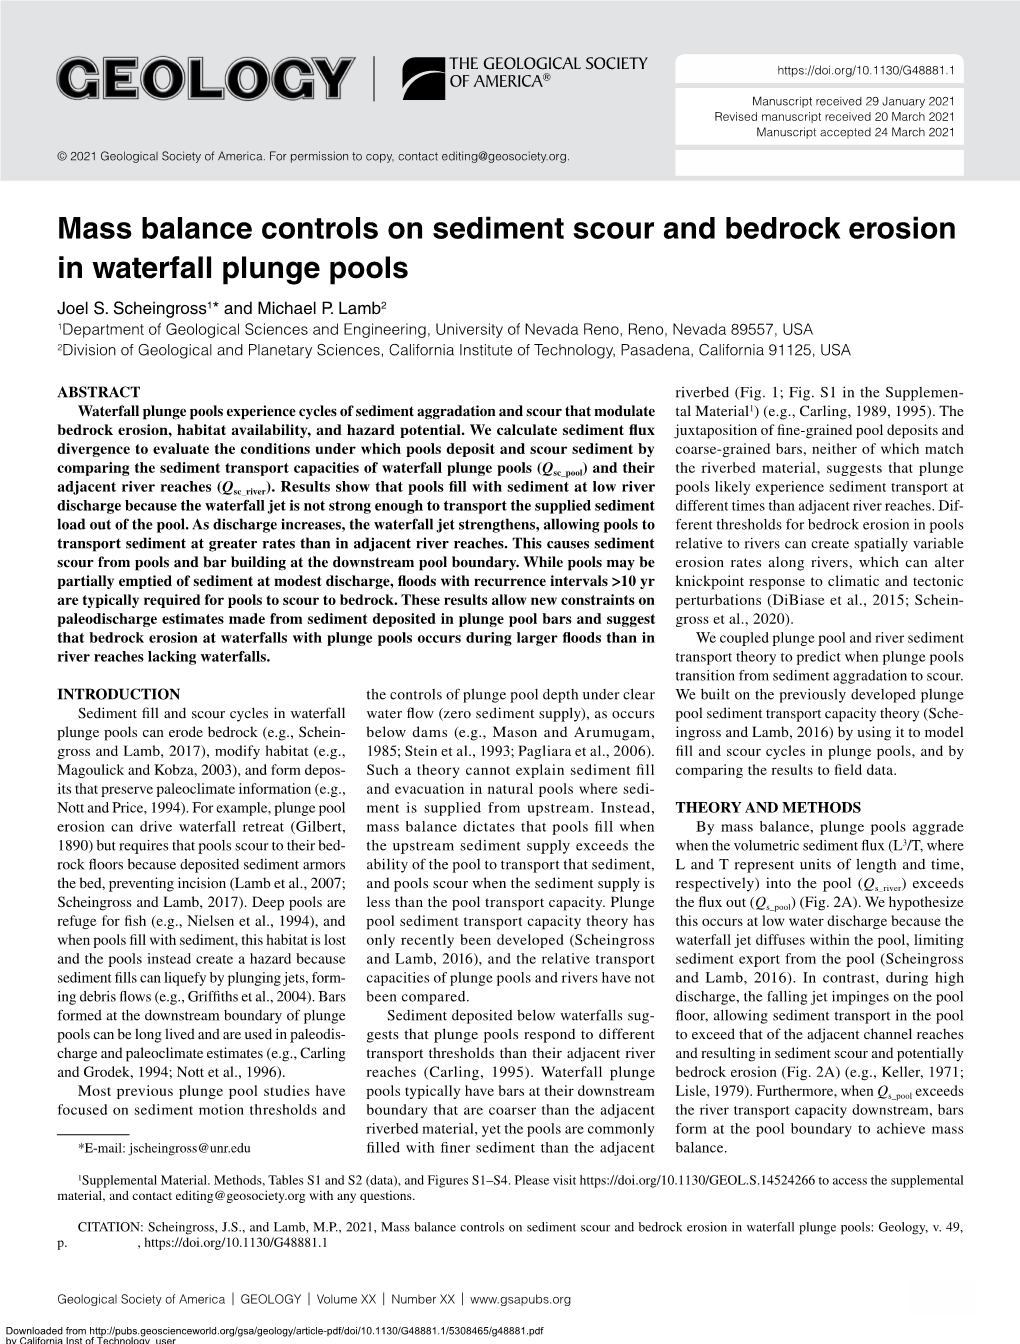 Mass Balance Controls on Sediment Scour and Bedrock Erosion in Waterfall Plunge Pools Joel S